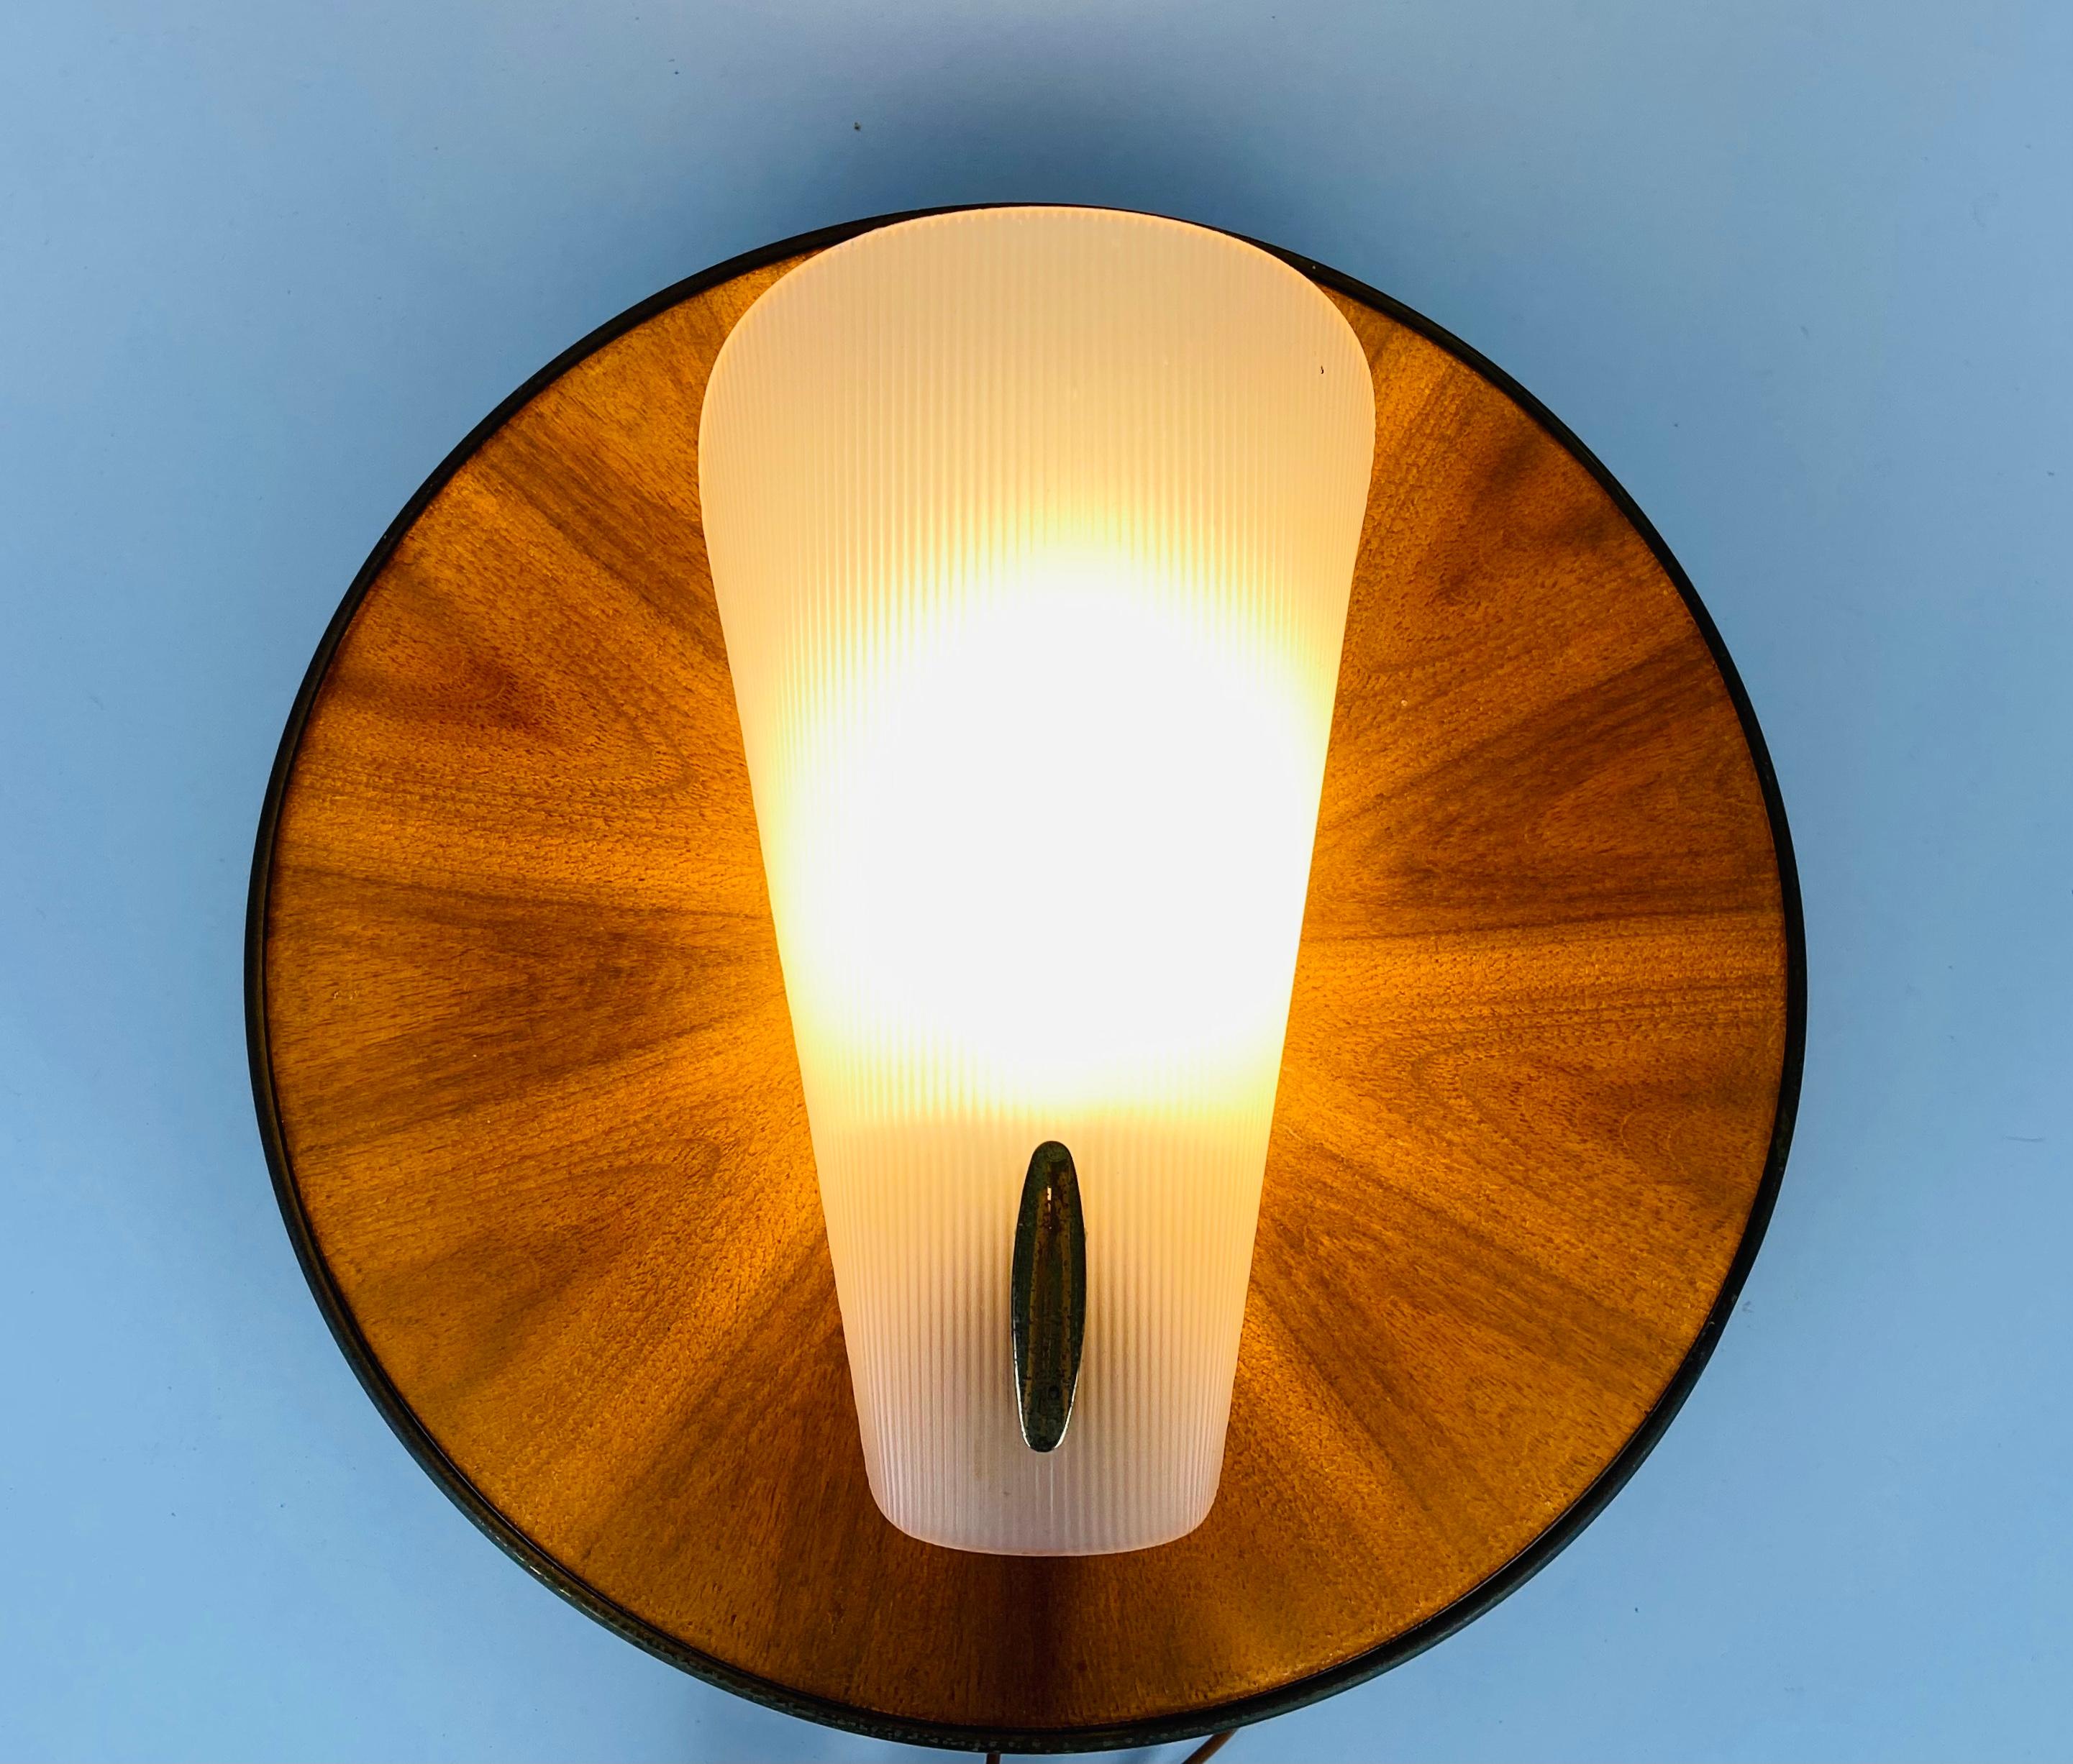 Midcentury Teak and Plexi Glass Wall Lamp in the style of Stilnovo, Italy For Sale 3